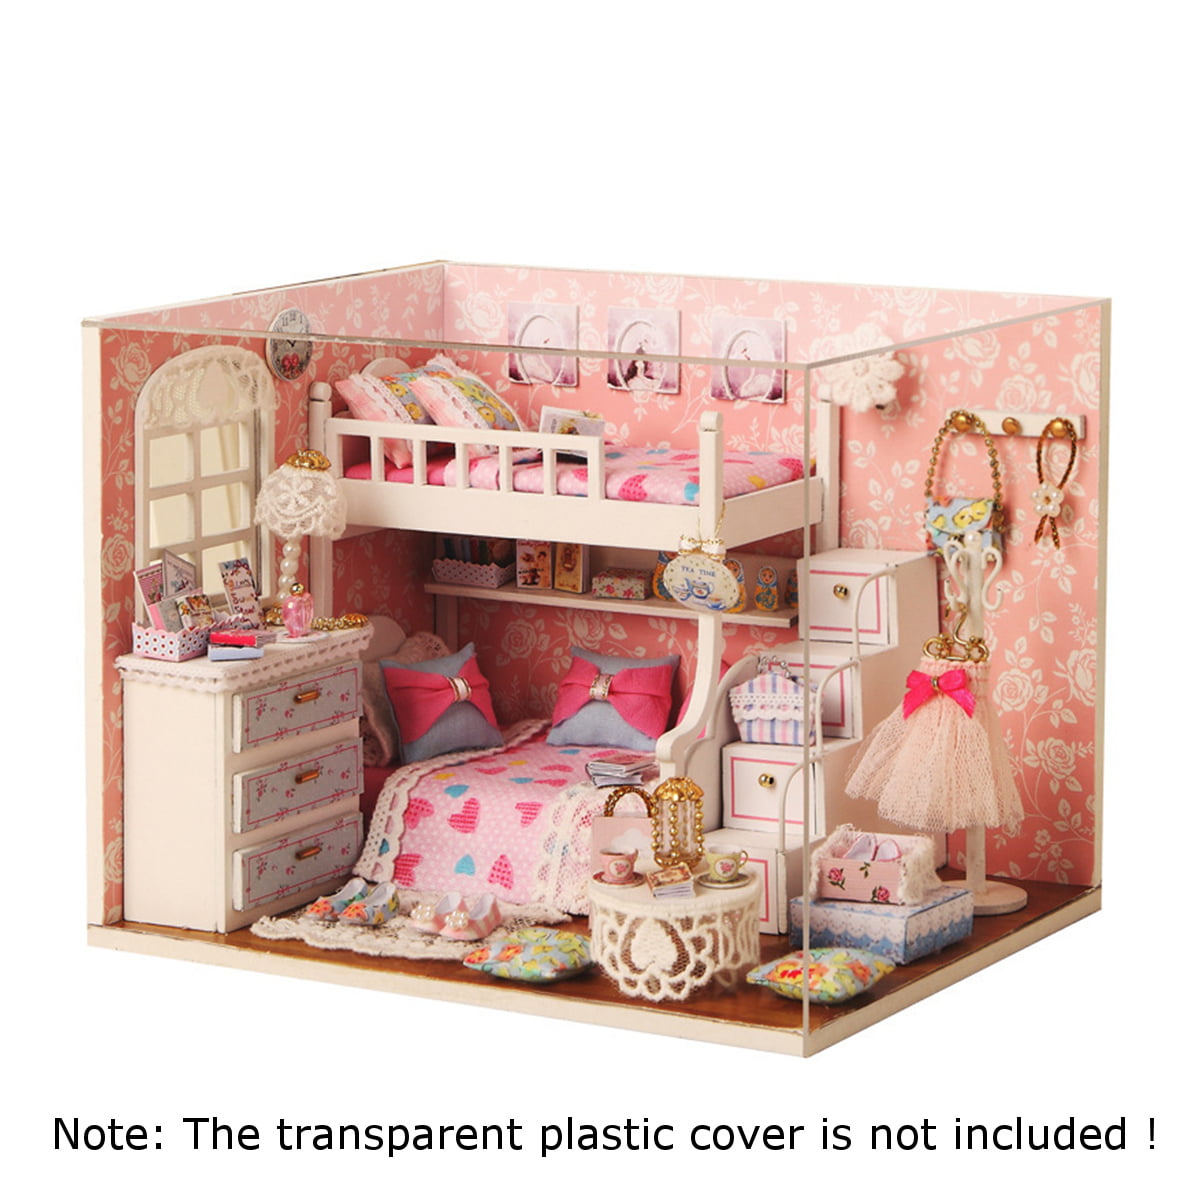 Details about   Miniature Wooden DIY Doll House Toys With Furniture For Children's Grown Ups New